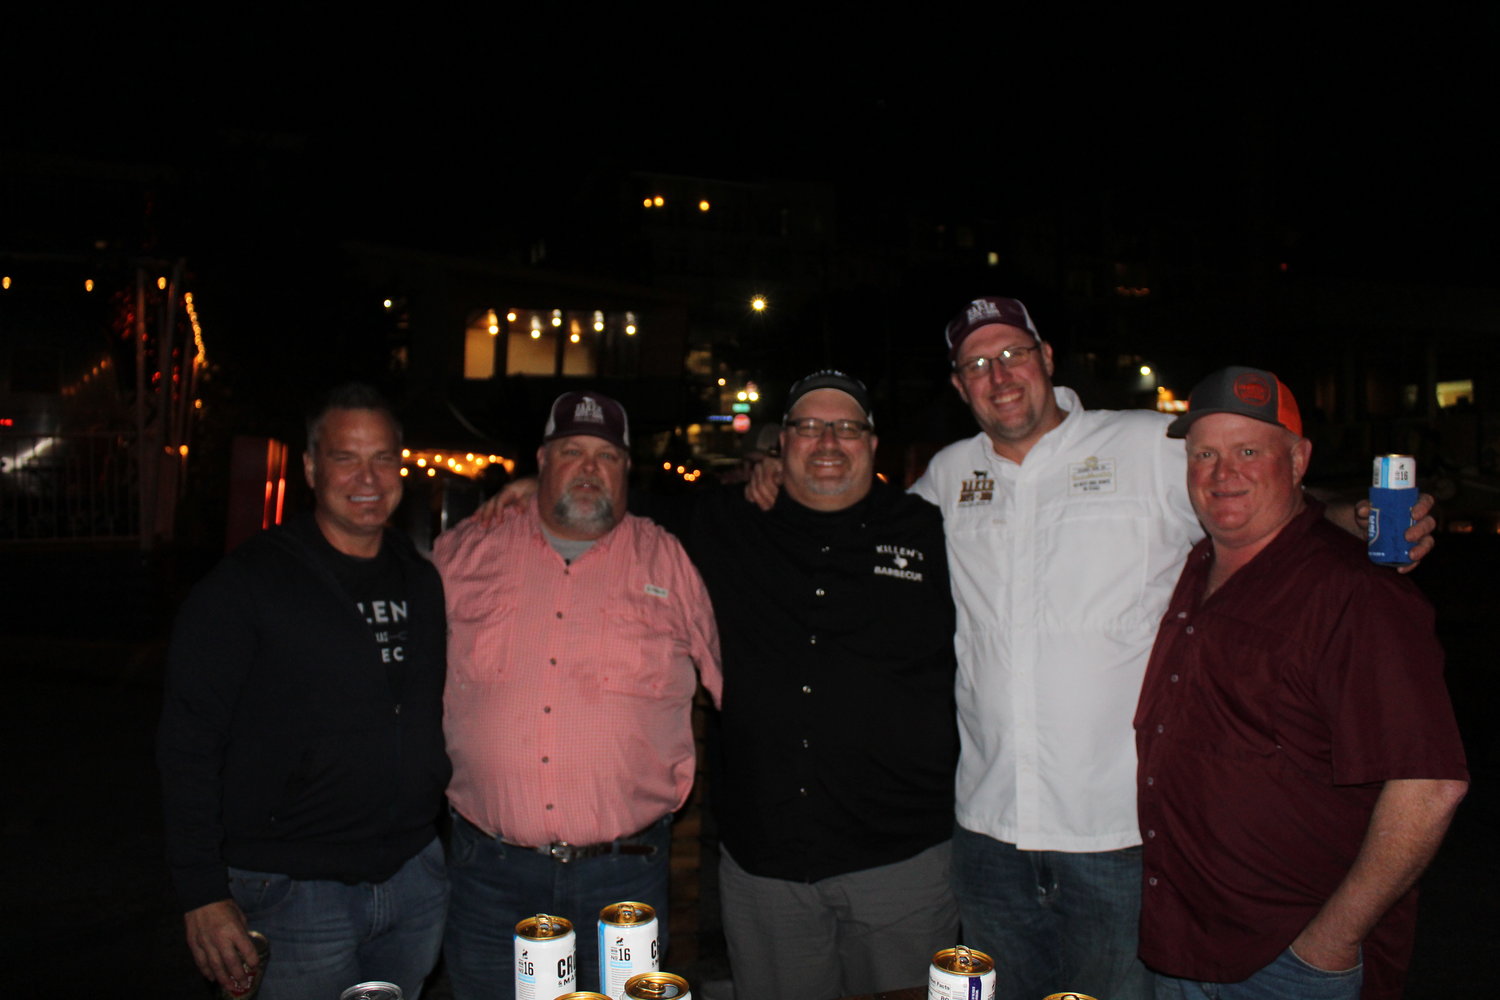 Against the backlighting of the Texas State Capital, Wayne Baker played host at the Franklin and Friends VIP Night in Austin before the Texas Monthly BBQ Festival.